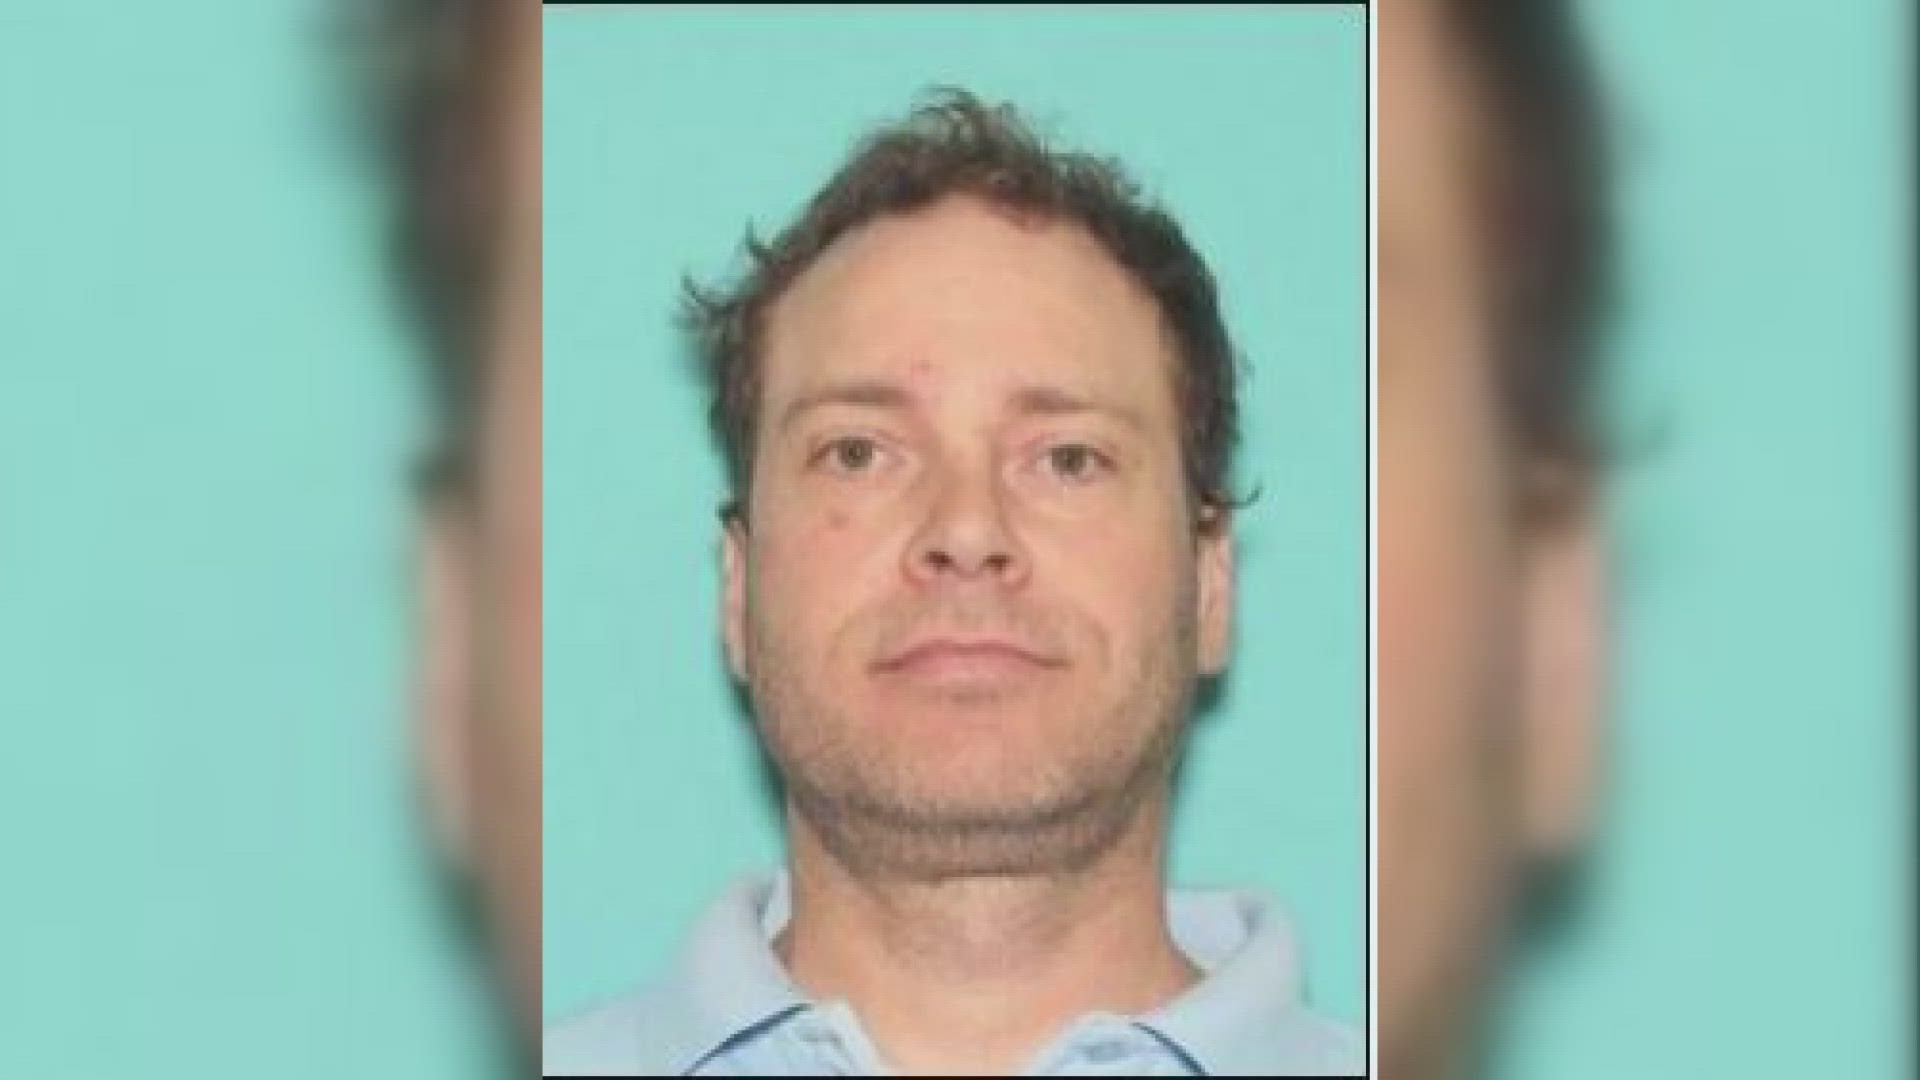 43-year-old Earle Gilbert Wolfrom Jr. of Coeur d’Alene was last seen on Saturday, June 3 at approximately 3 p.m. in Hayden.